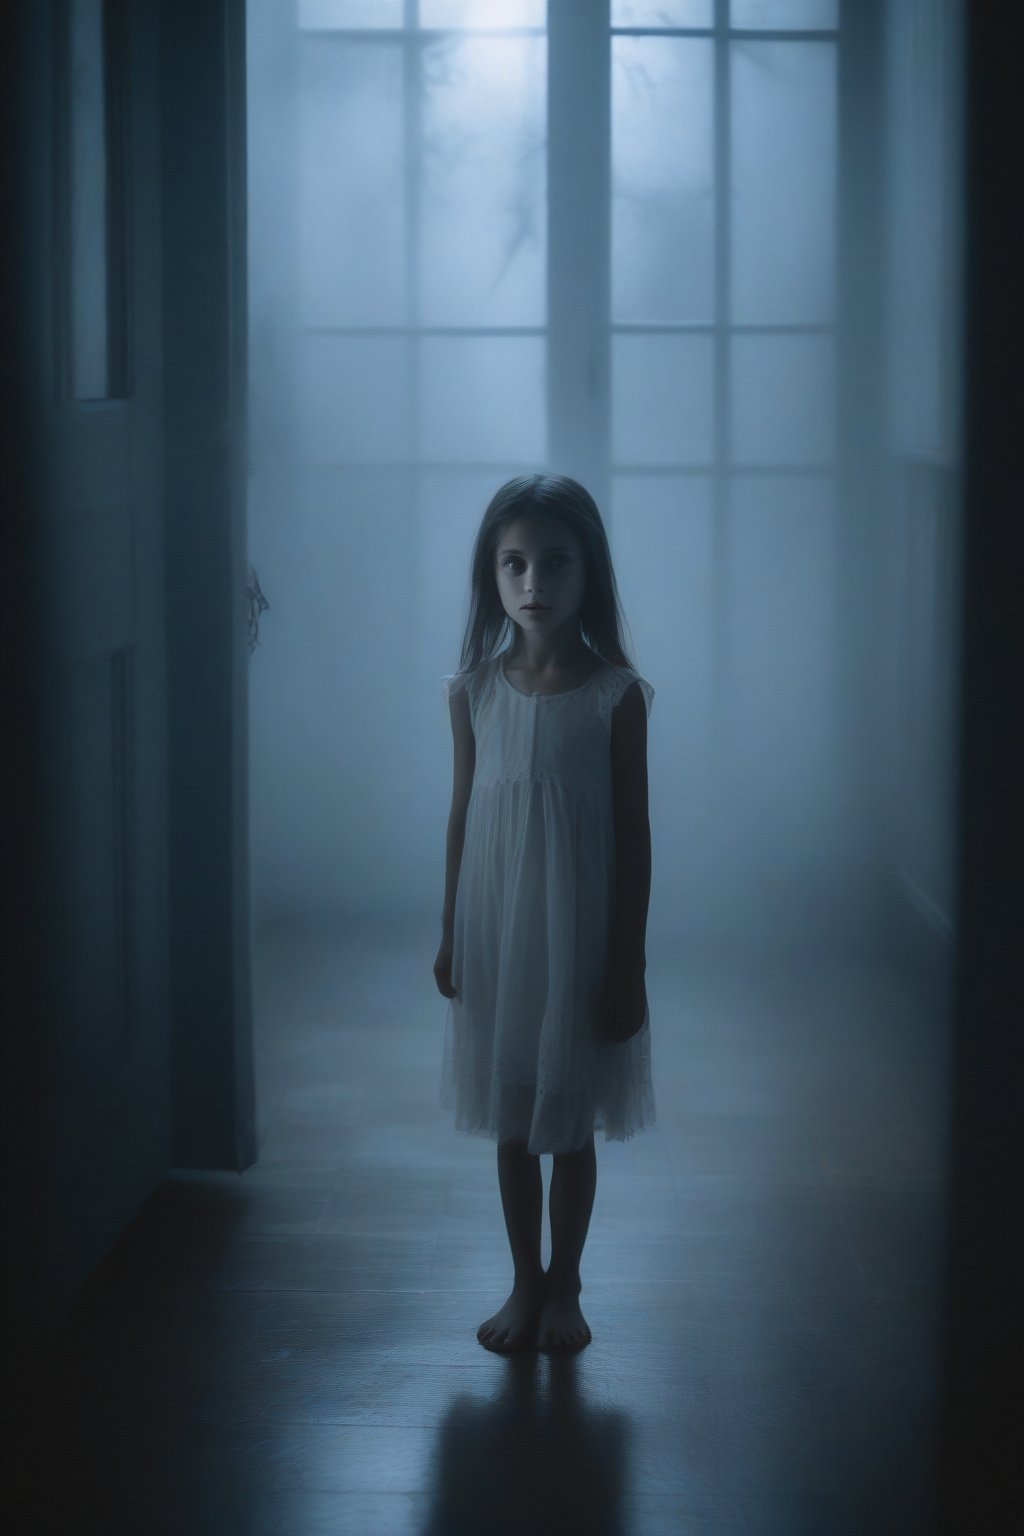 A photo realistic and haunting scene unfolds: a lone scared, young loli girl stands in the dark, eerie atmosphere of a darkened haunted house on a foggy night. Her (see-through nightdress) reveals her vulnerability amidst the shadows. The flickering candles cast an otherworldly glow, illuminating her terrified expression as she gazes terrified out the window, her cute features twisted in fear.score_9, score_8_up